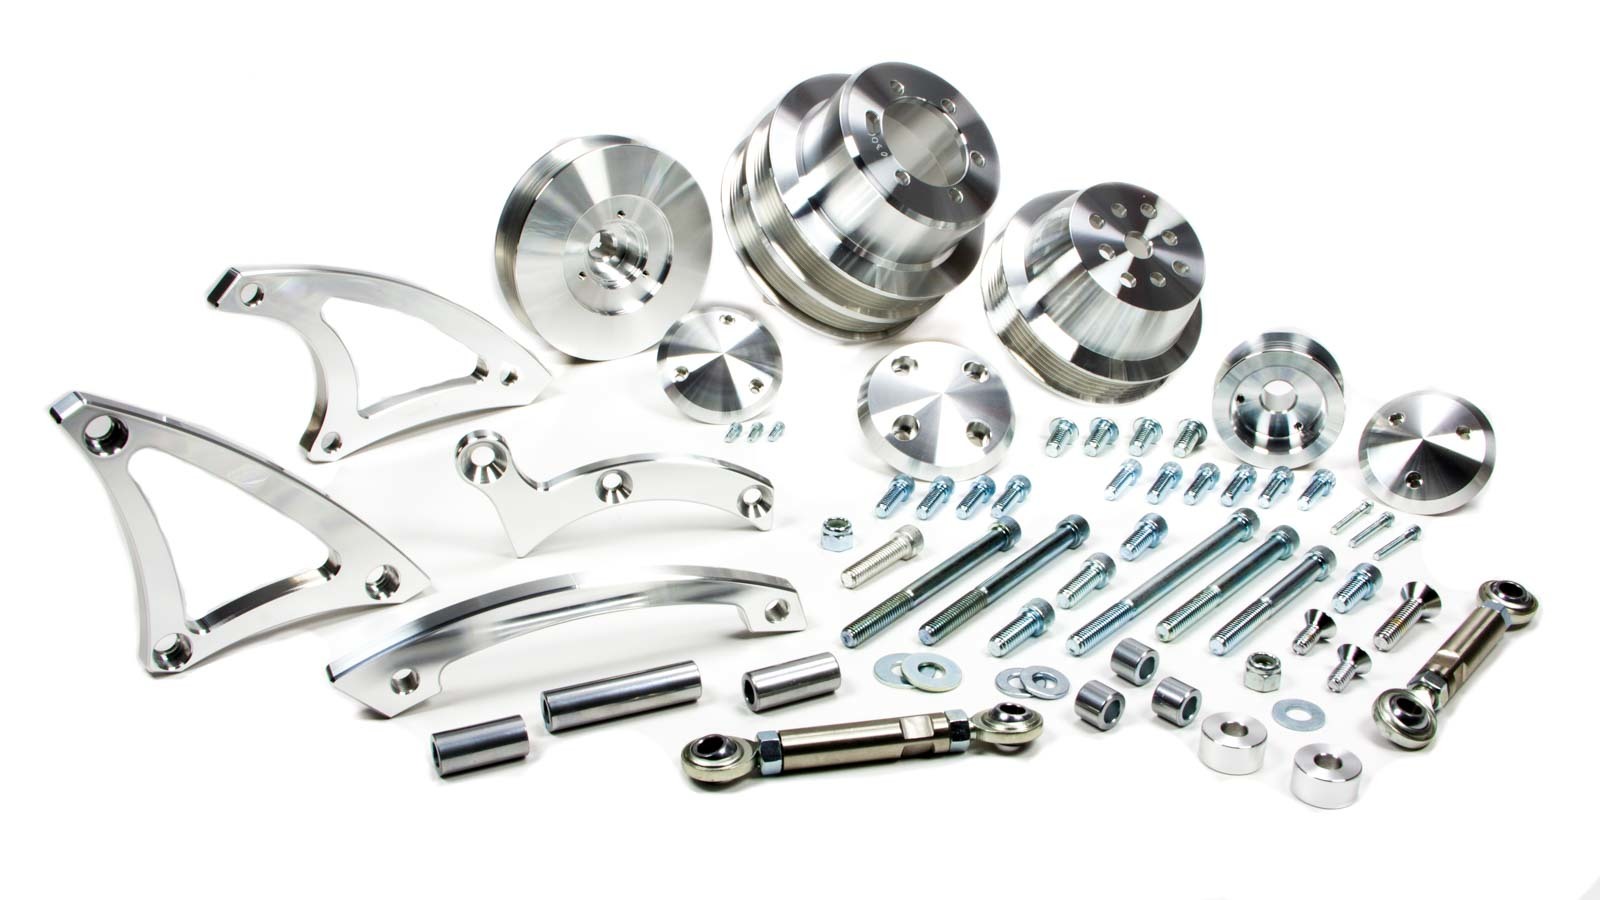 March Performance 40525 Pulley Kit, Deluxe Style, 6-Rib Serpentine, Aluminum, Clear Powder Coat, Mopar RB-Series, Kit